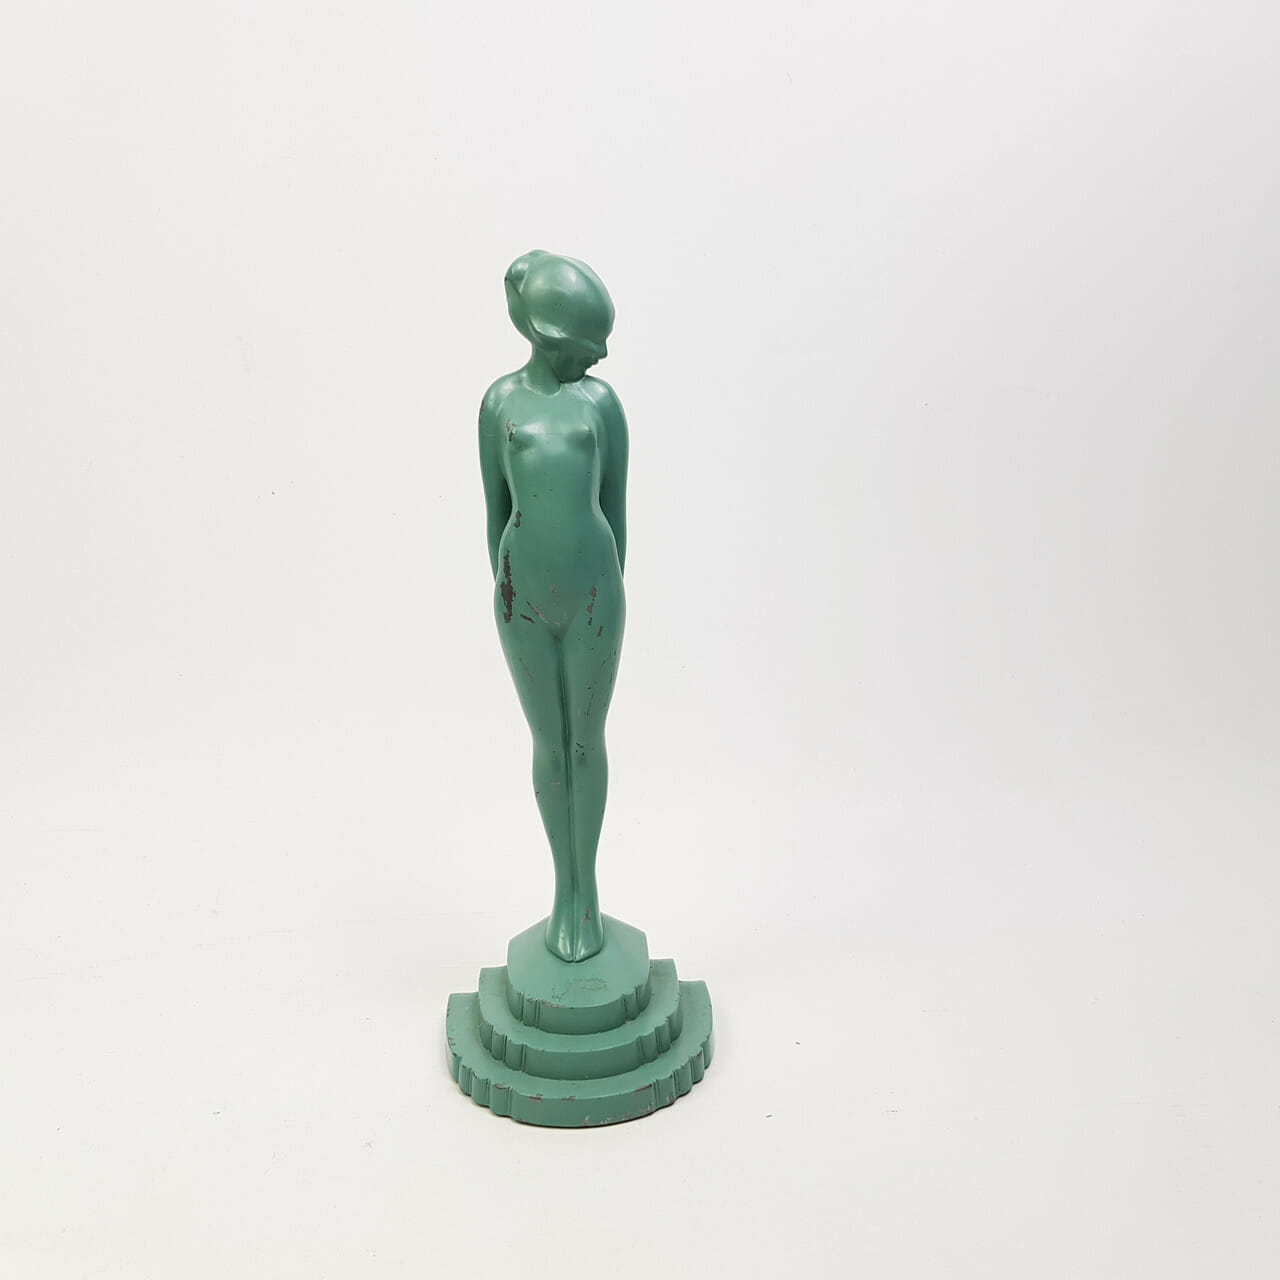 RETRO GREEN LADY FIGURINE/STATUE MADE IN JAPAN #41654